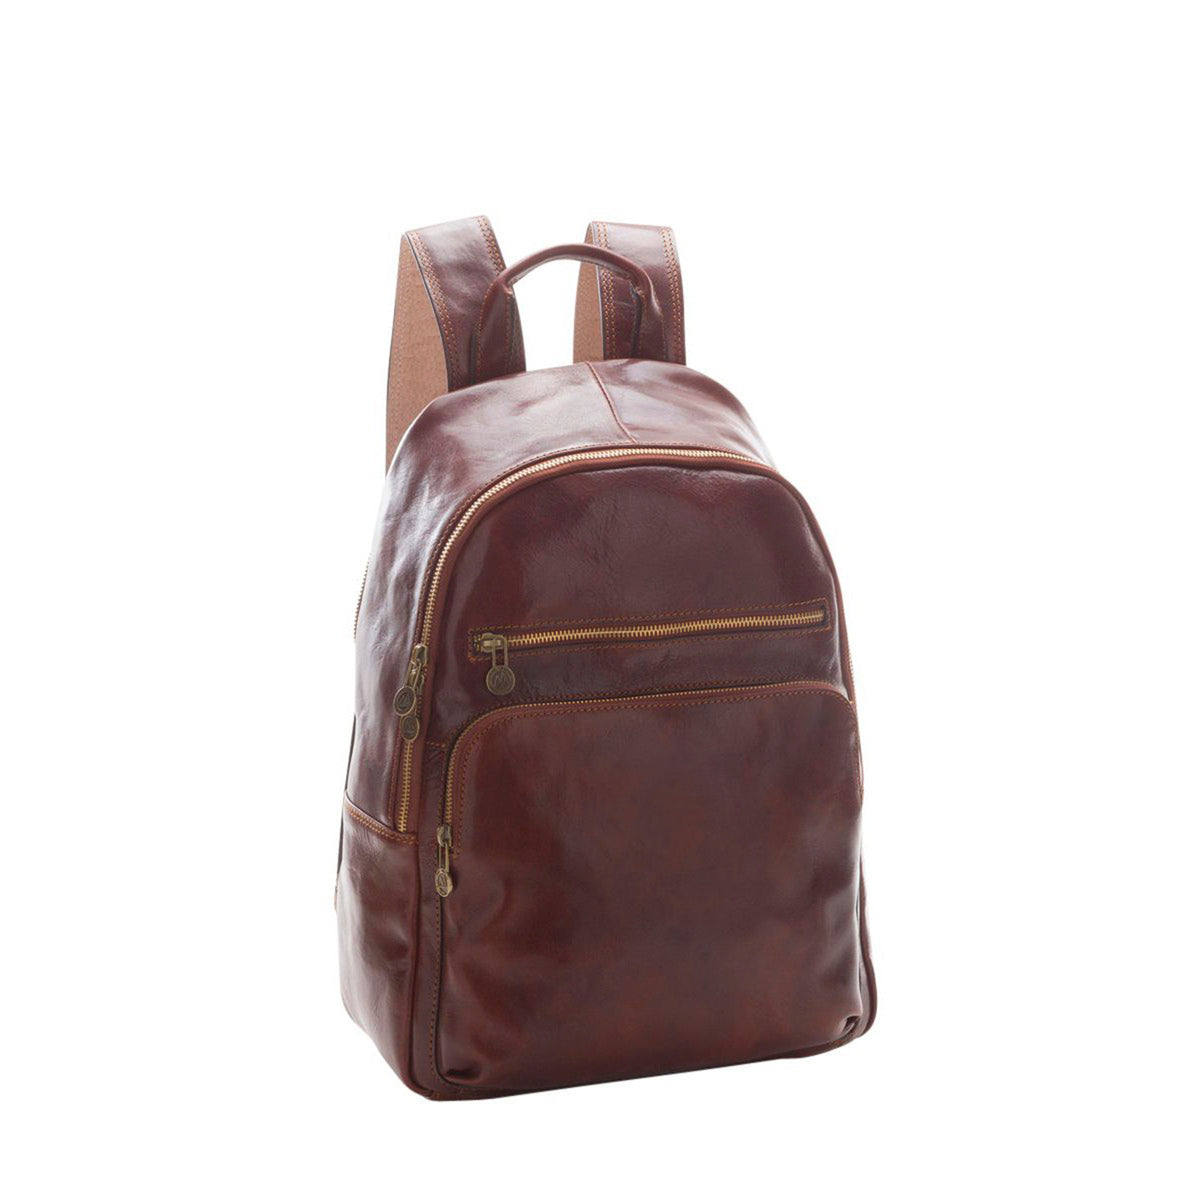 Classic backpack in full grain leather with zipper adjustable straps front pocket available in various colors